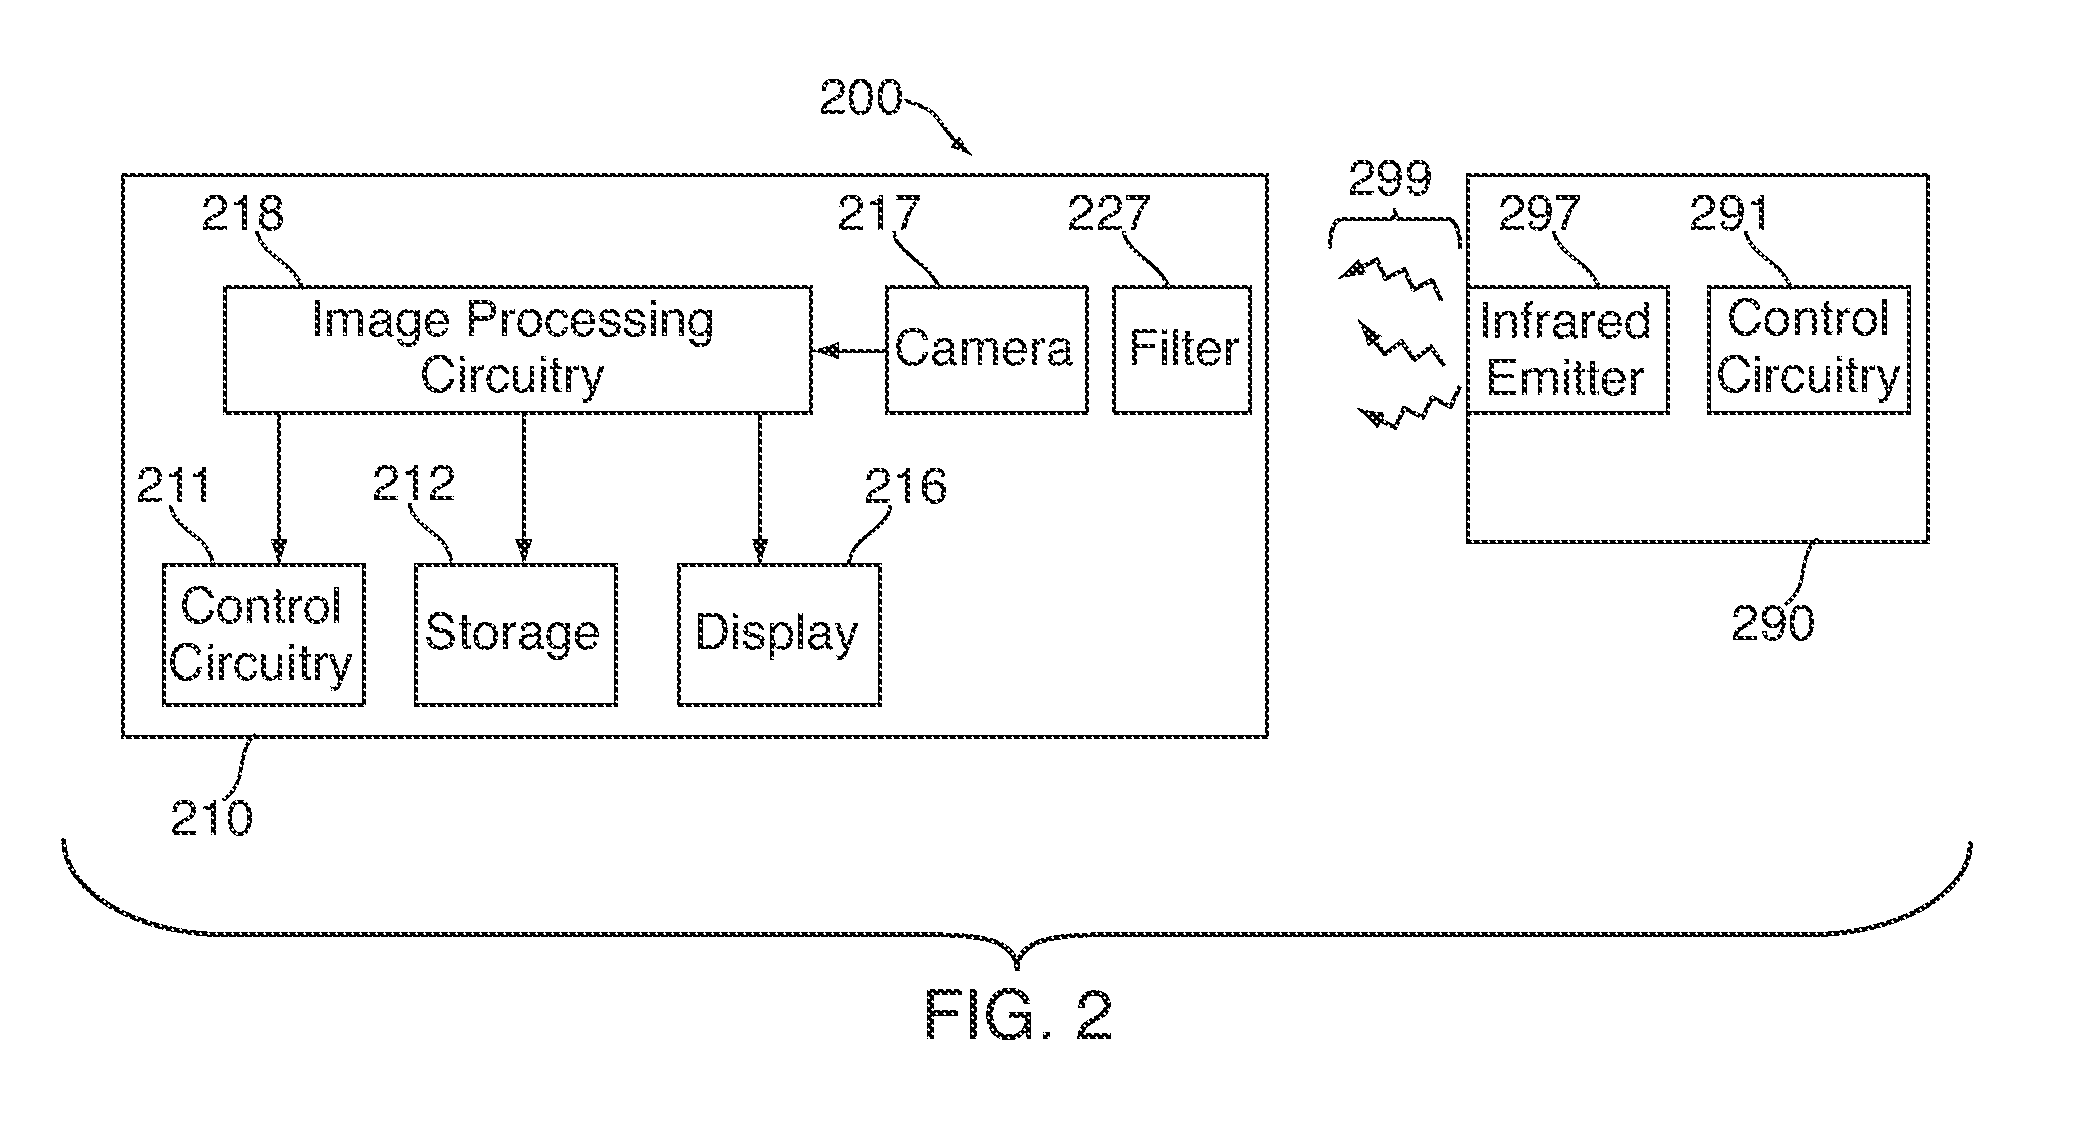 Systems and methods for receiving infrared data with a camera designed to detect images based on visible light